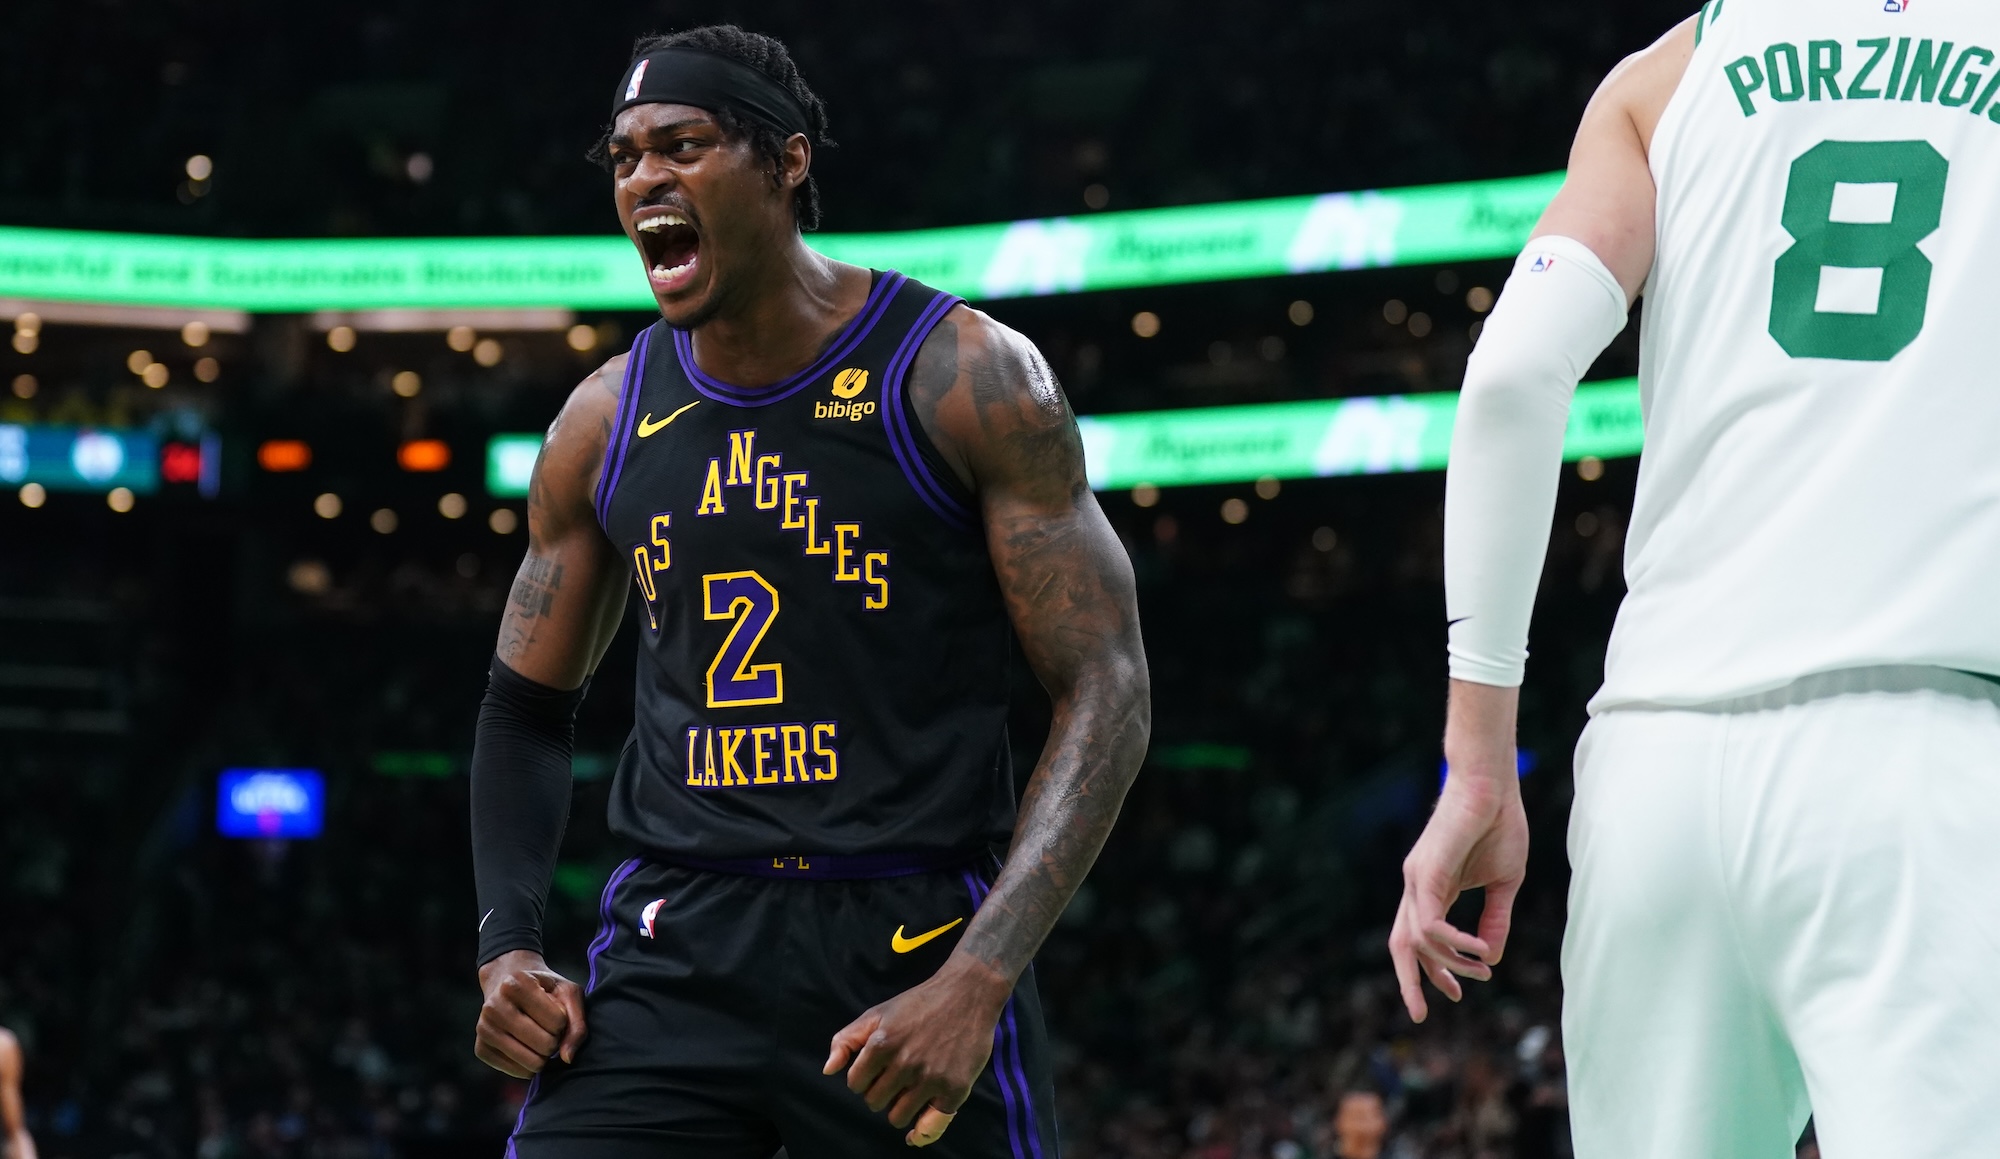 Vanderbilt’s defensive tone and energy were key for the Lakers against the Celtics.